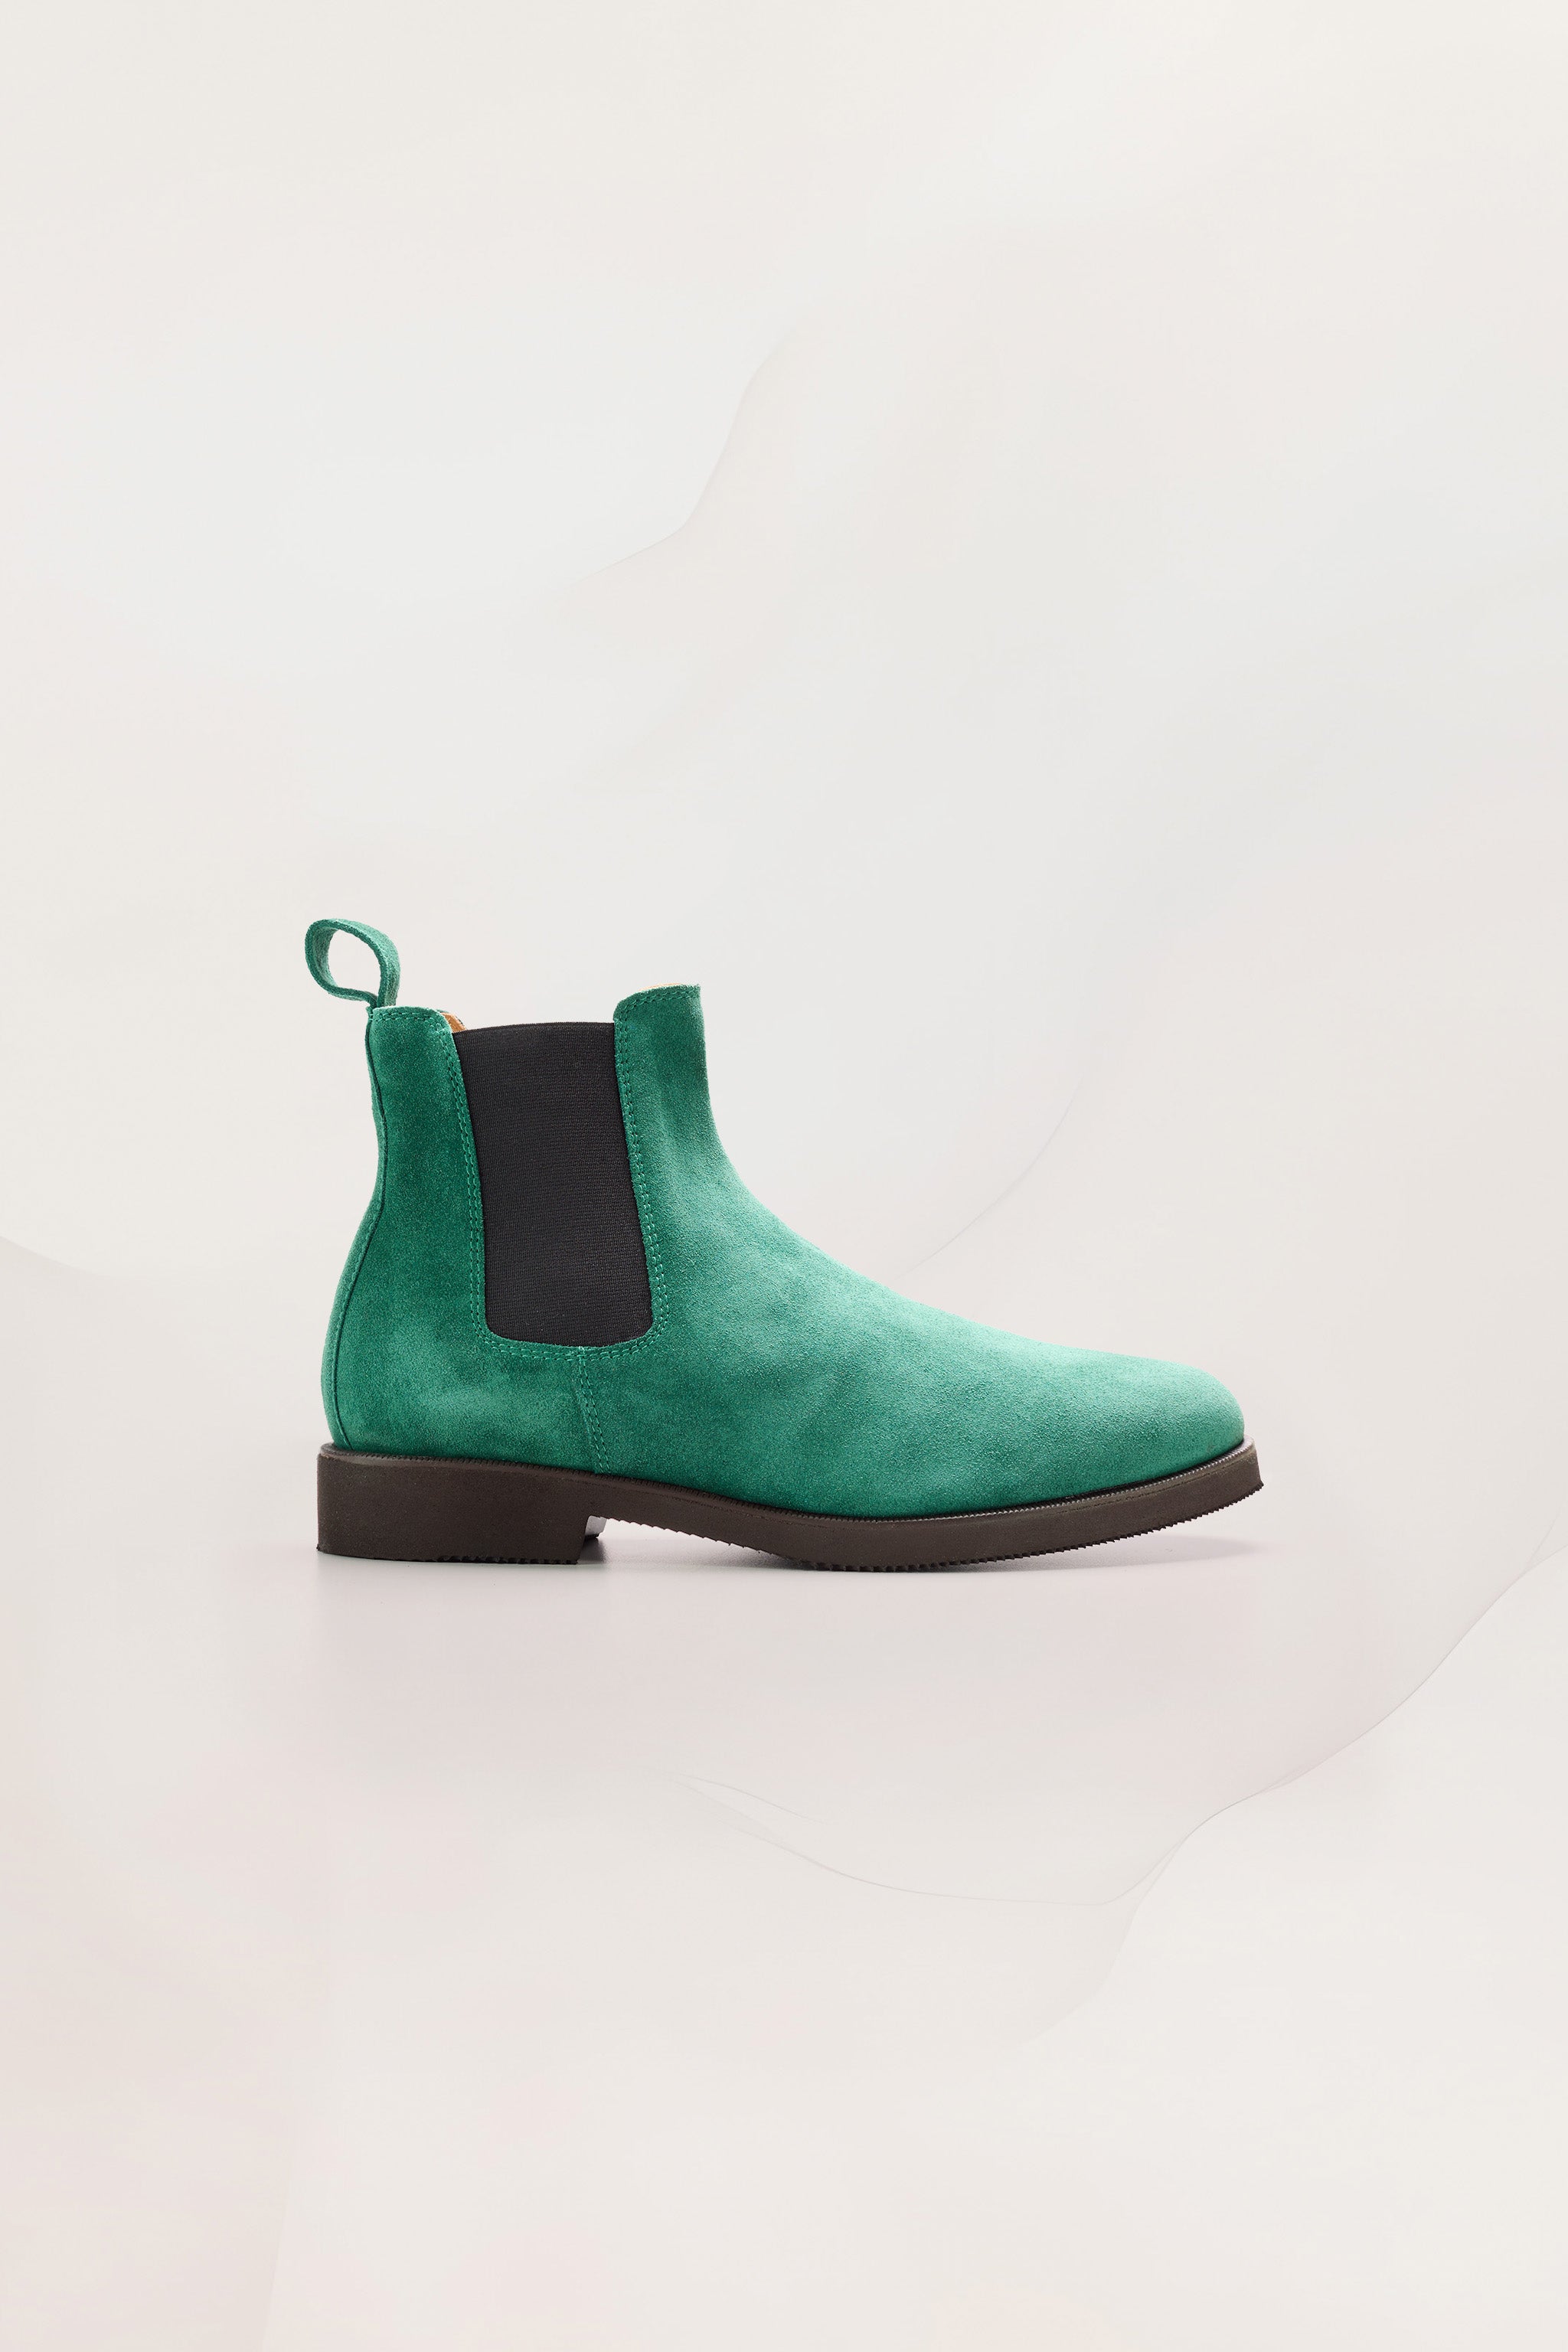 Womens Chelsea Boots in Lolo Green Suede